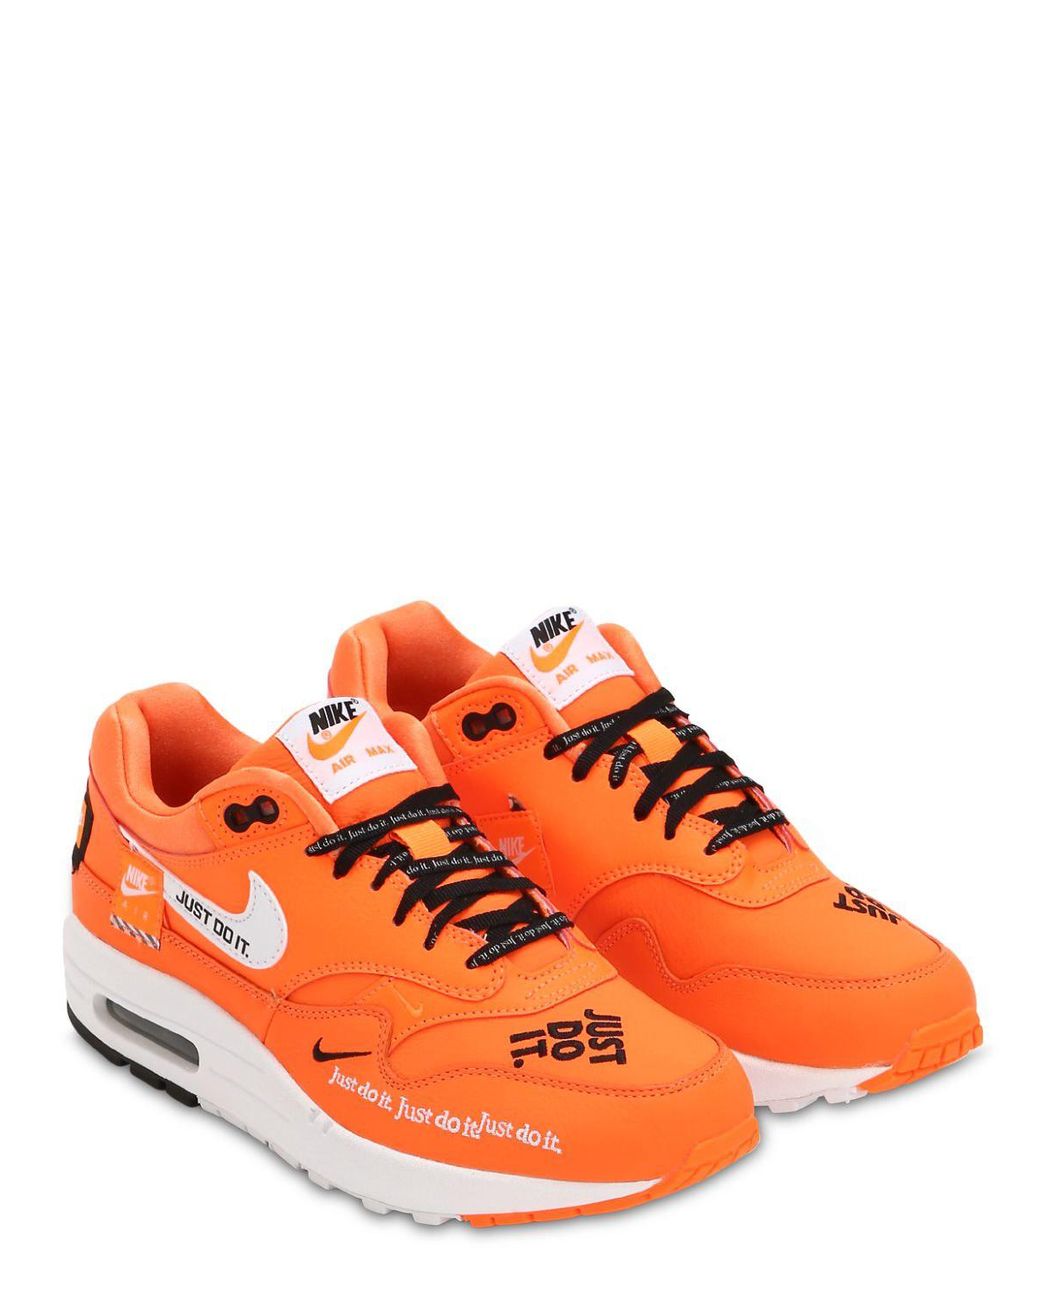 chance rainfall a million Nike Air Max 1 Just Do It Pack Orange for Men | Lyst